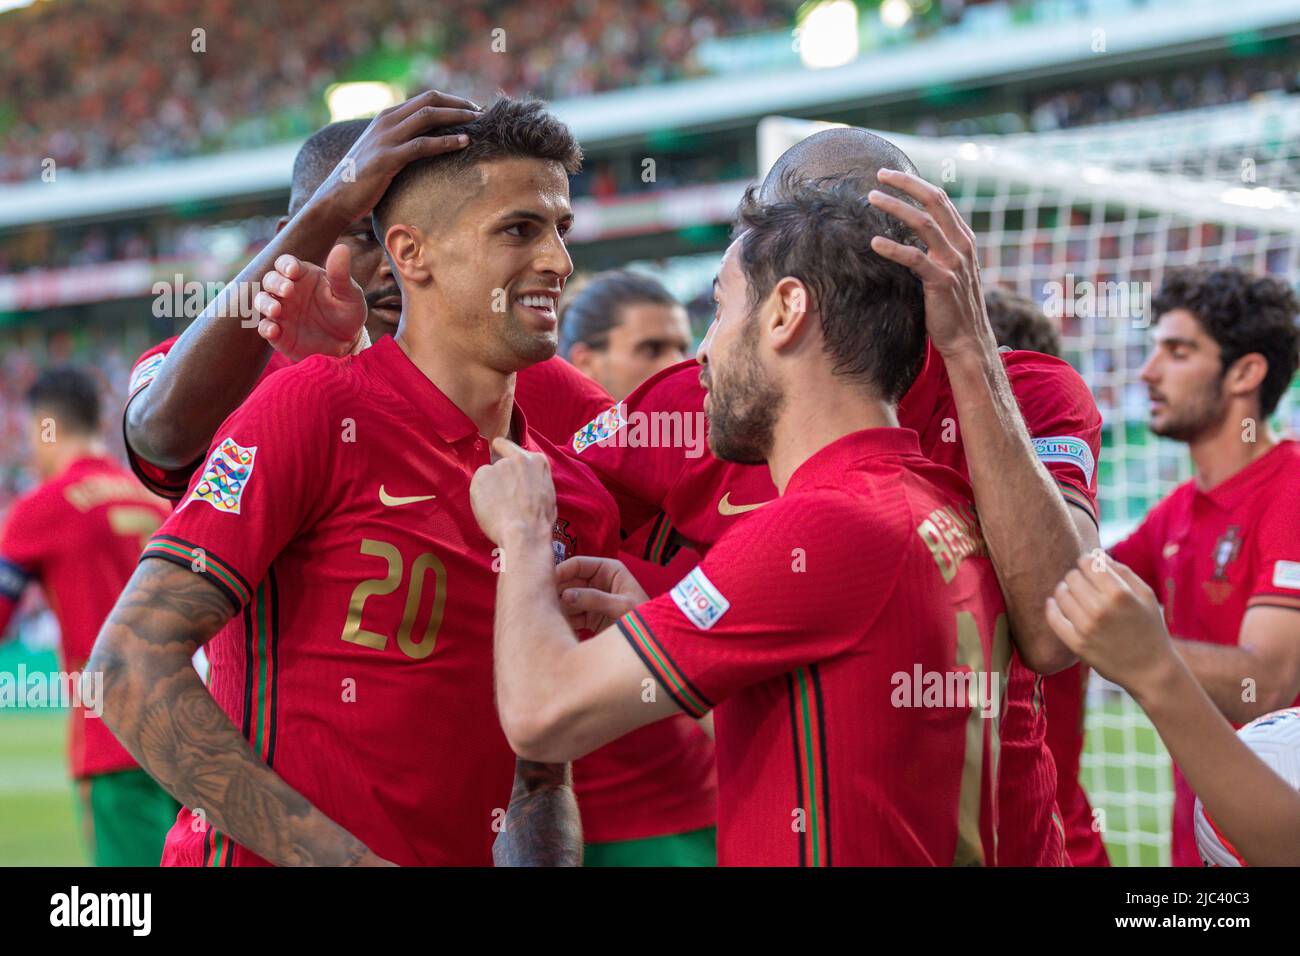 June 09, 2022. Lisbon, Portugal. Portugal's and Manchester City defender Joao Cancelo (20) celebrating after scoring a goal during the UEFA Nations League Final Tournament between Portugal and Czechia Credit: Alexandre de Sousa/Alamy Live News Stock Photo